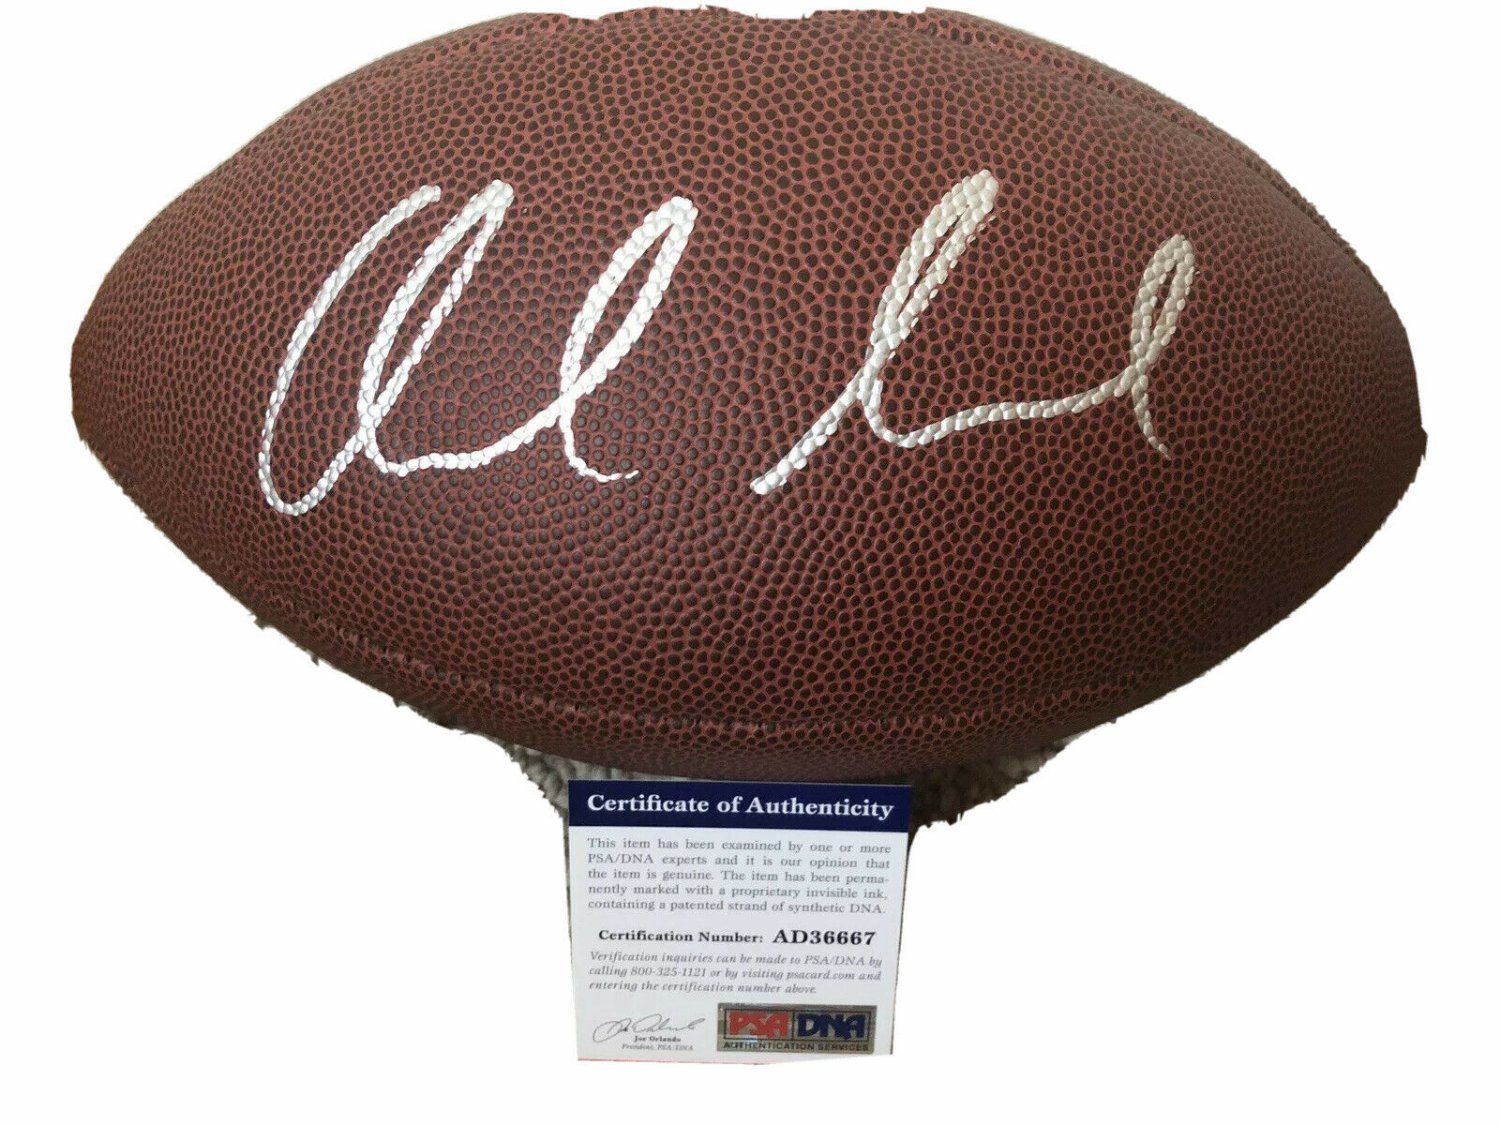 andrew luck autographed football